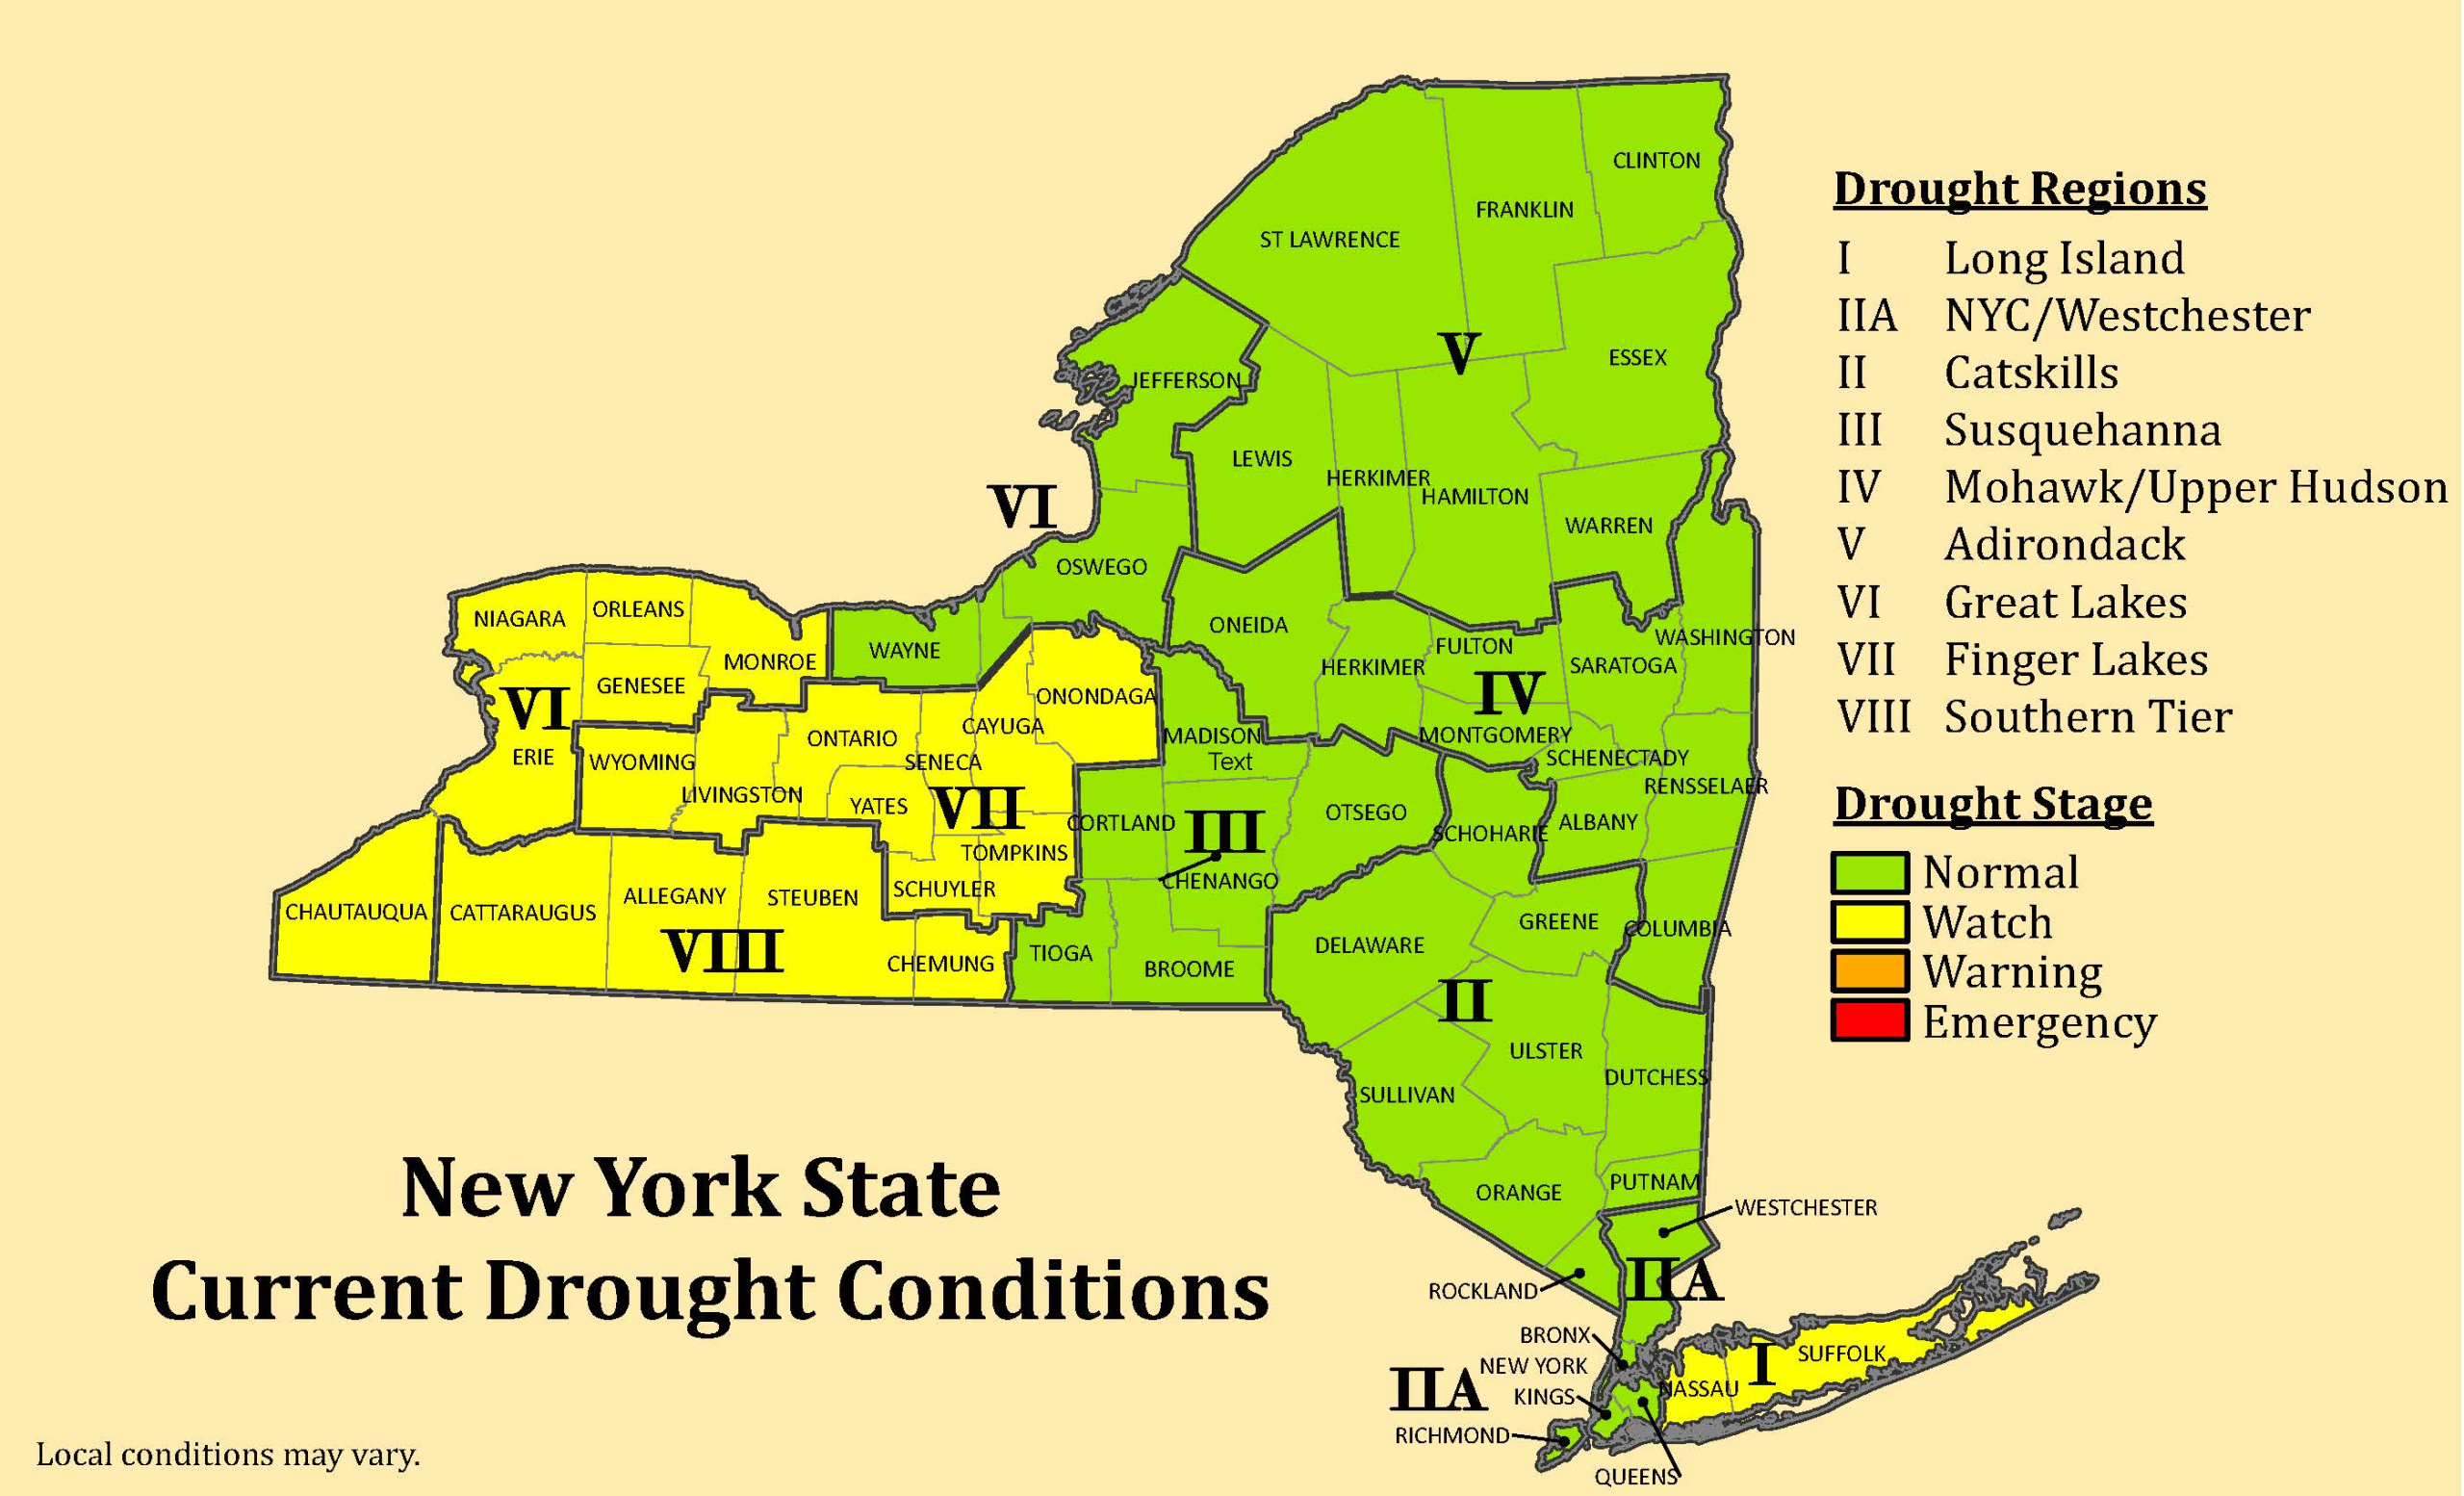 DEC issues Drought Watch for Long Island